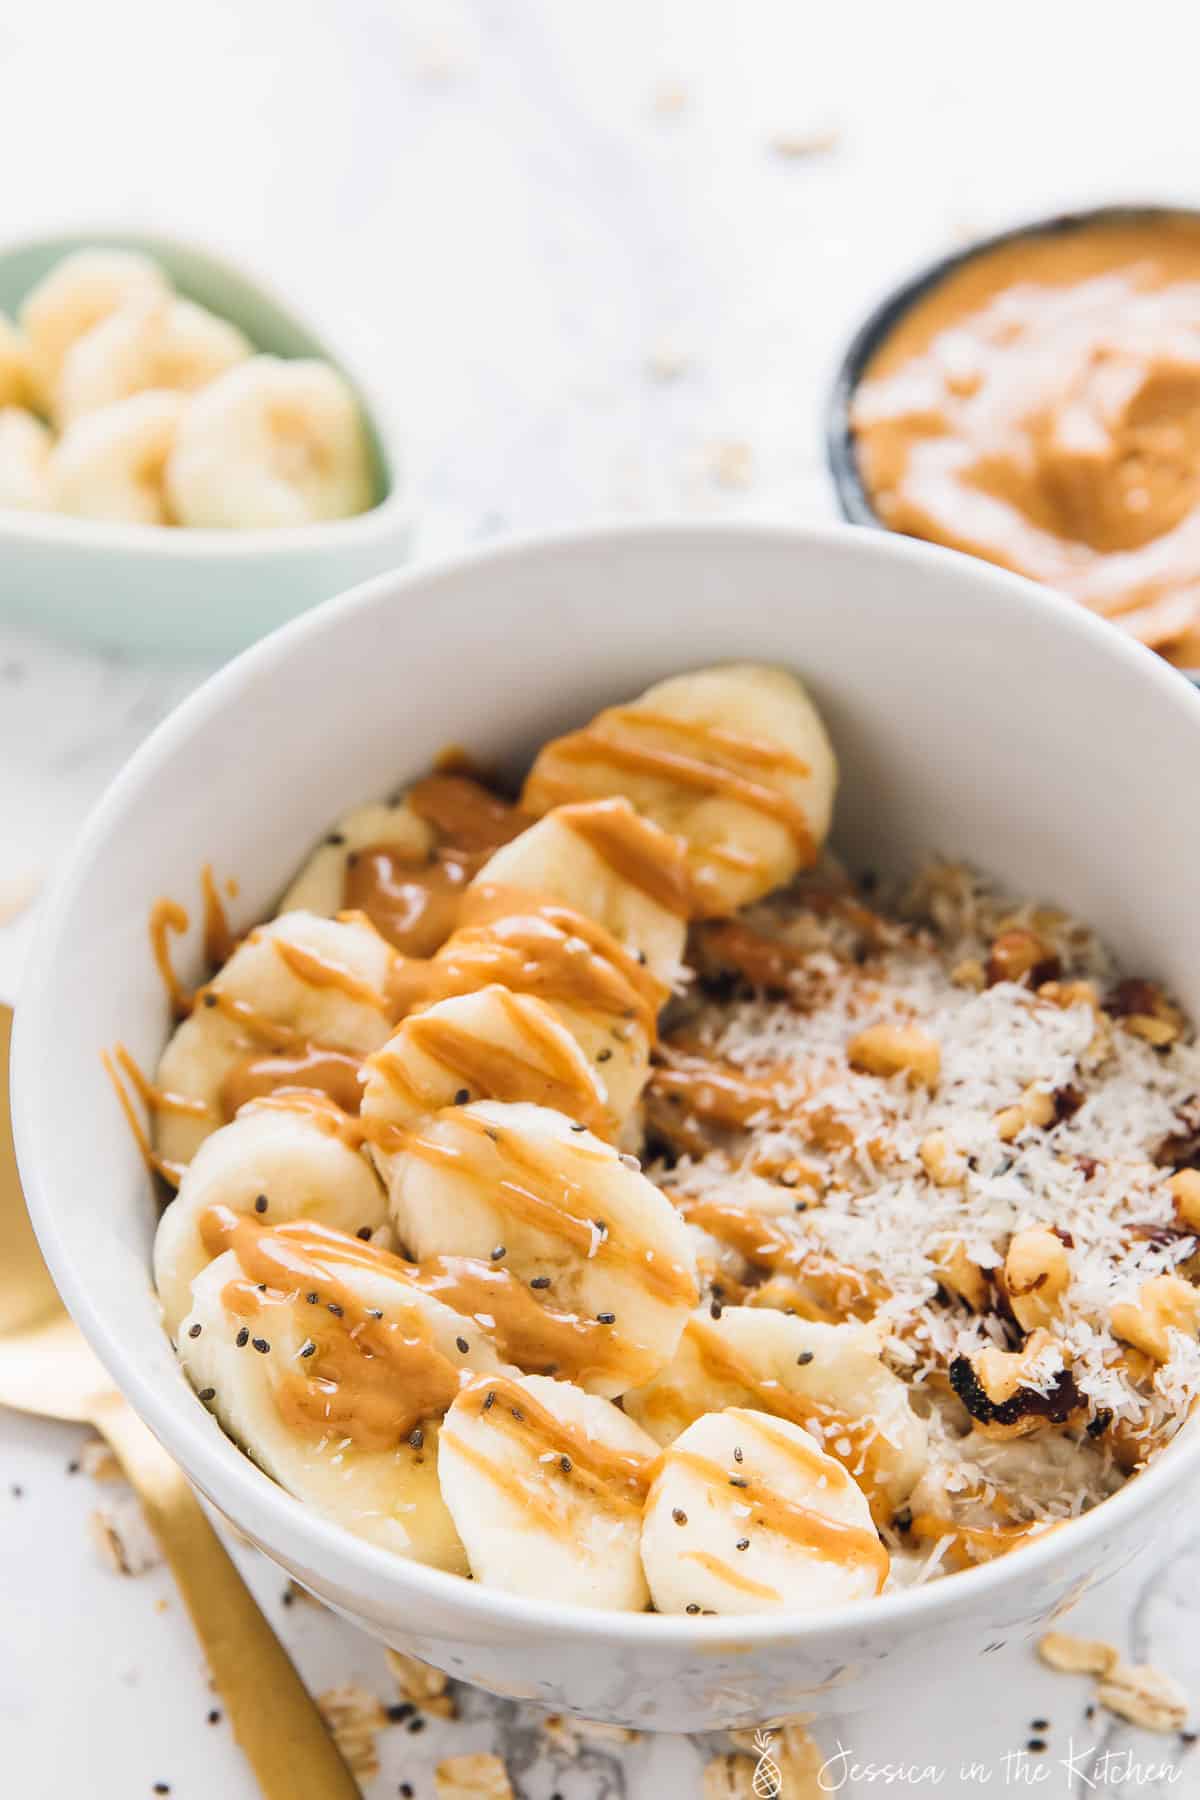 Oats in a white bowl with slices bananas and peanut butter drizzled on top.